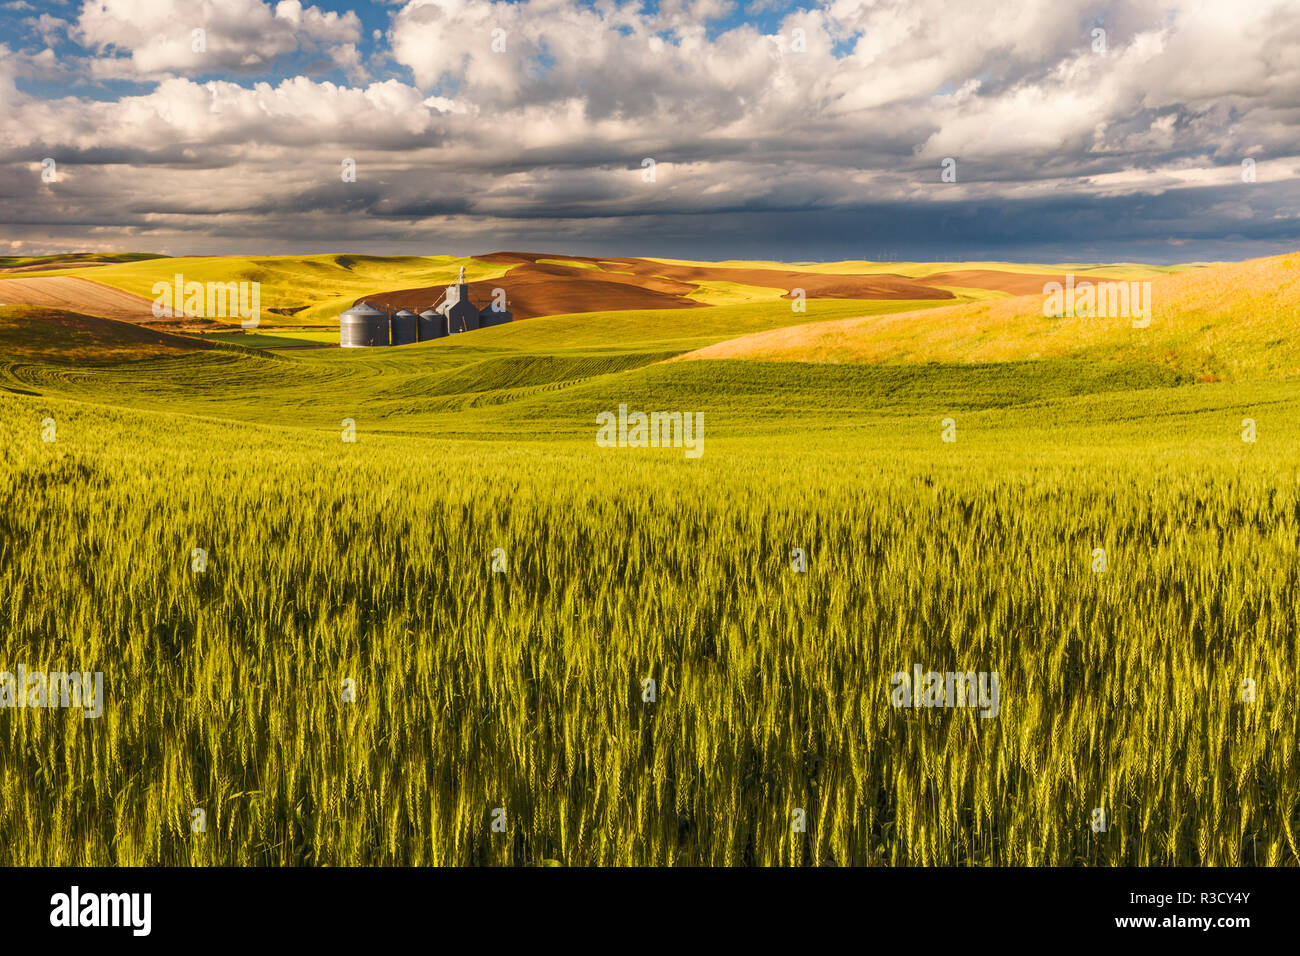 Contoured rolling hills of wheat and grain silos, Palouse region of Eastern Washington State. Stock Photo